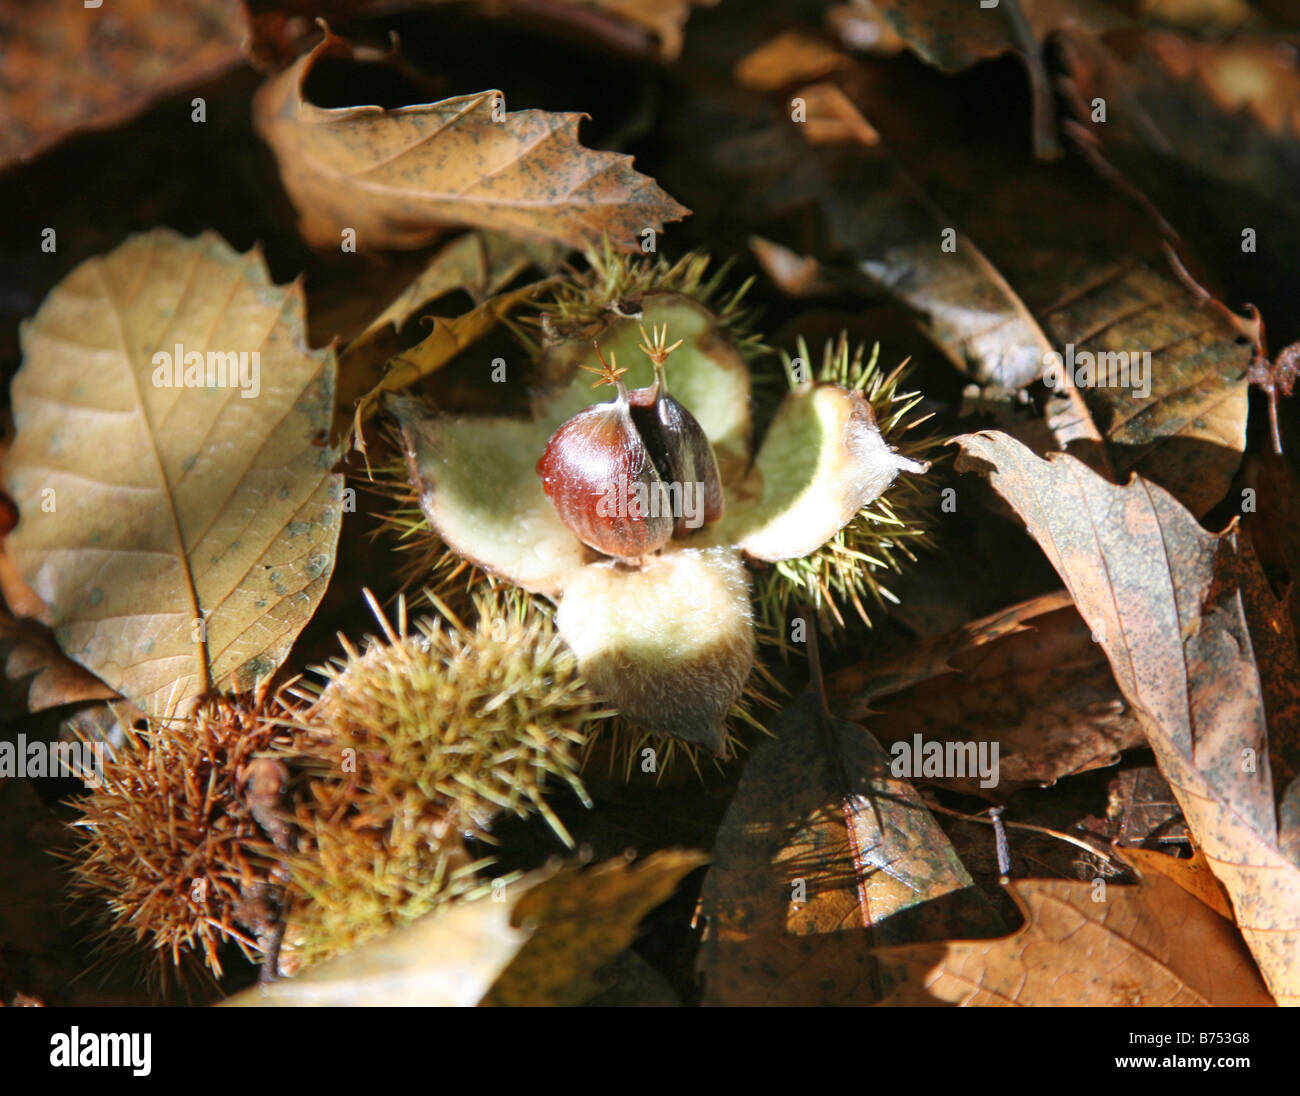 Sweet Chestnuts (Castanea sativa, family Fagaceae) opening out from their spiky shell case on a bed of leaves Stock Photo